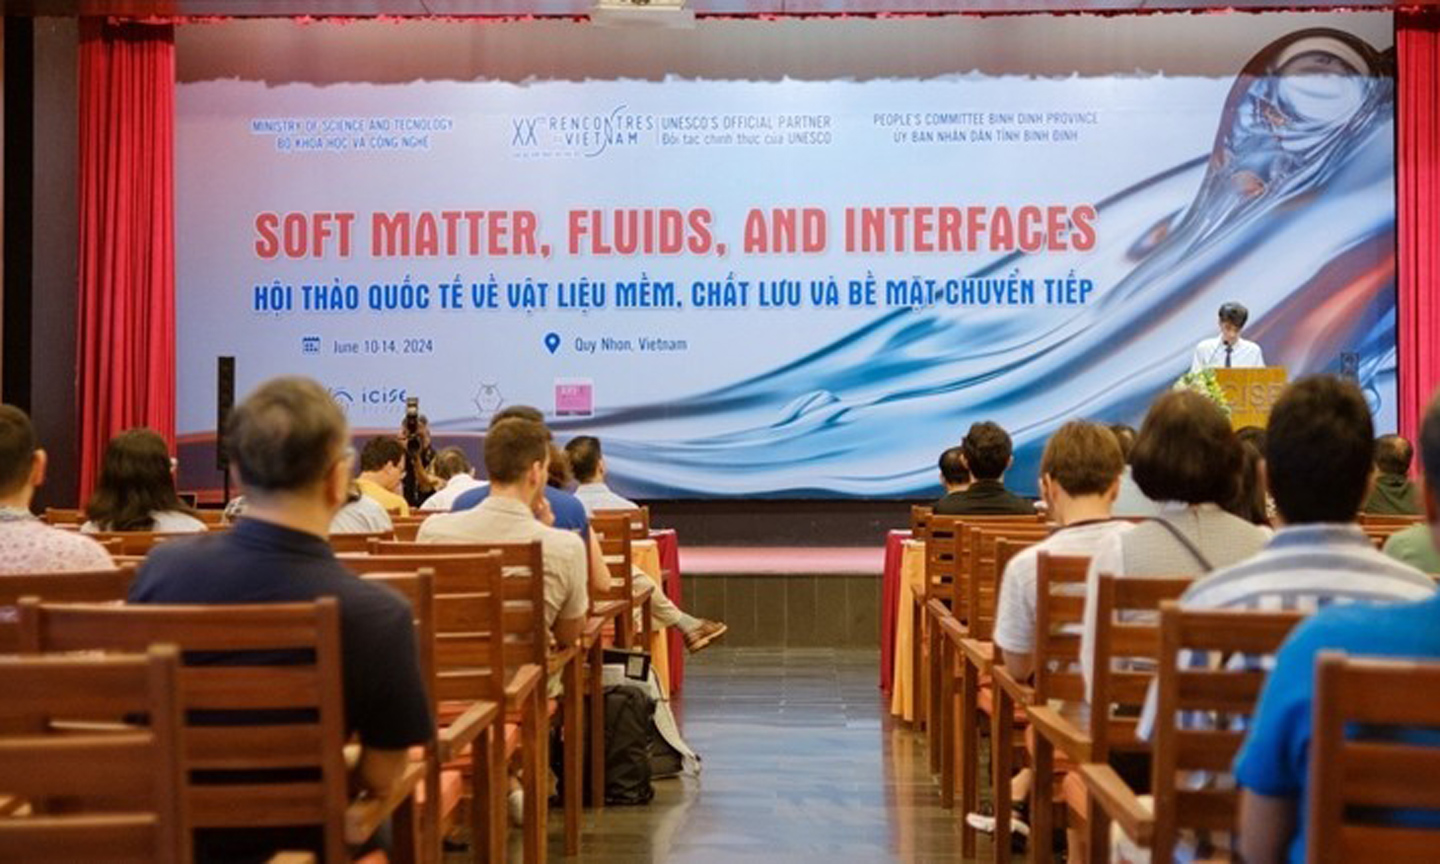 Nearly 80 researchers join conference on soft matter, fluids and interfaces